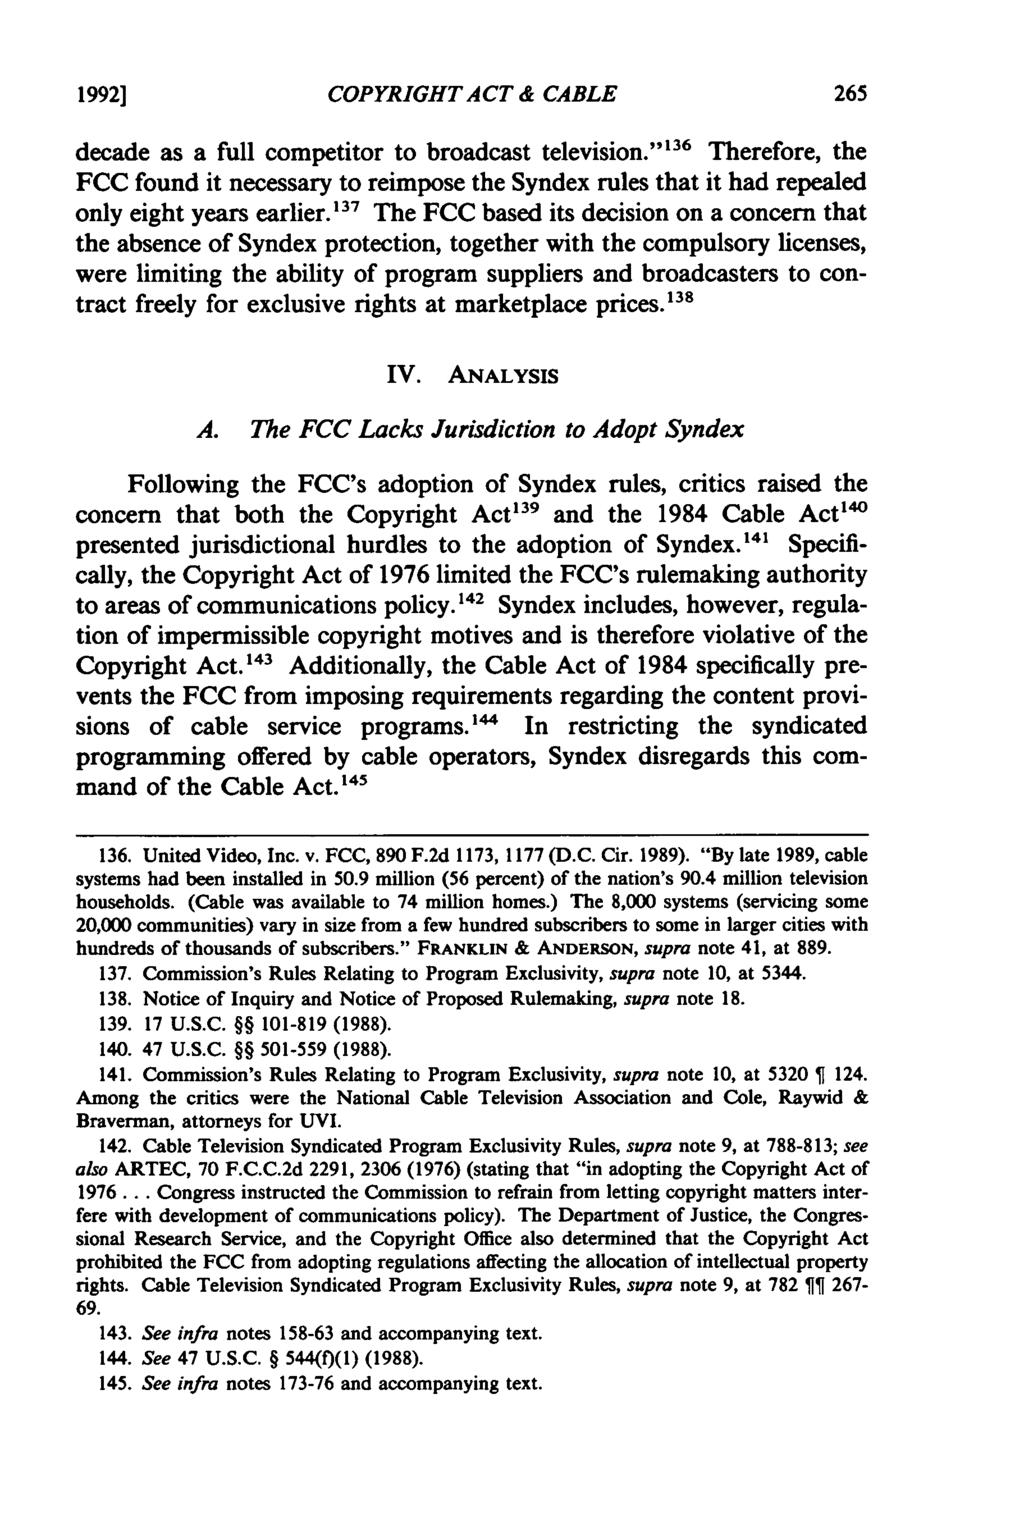 1992] COPYRIGHT ACT & CABLE decade as a full competitor to broadcast television."' 36 Therefore, the FCC found it necessary to reimpose the Syndex rules that it had repealed only eight years earlier.